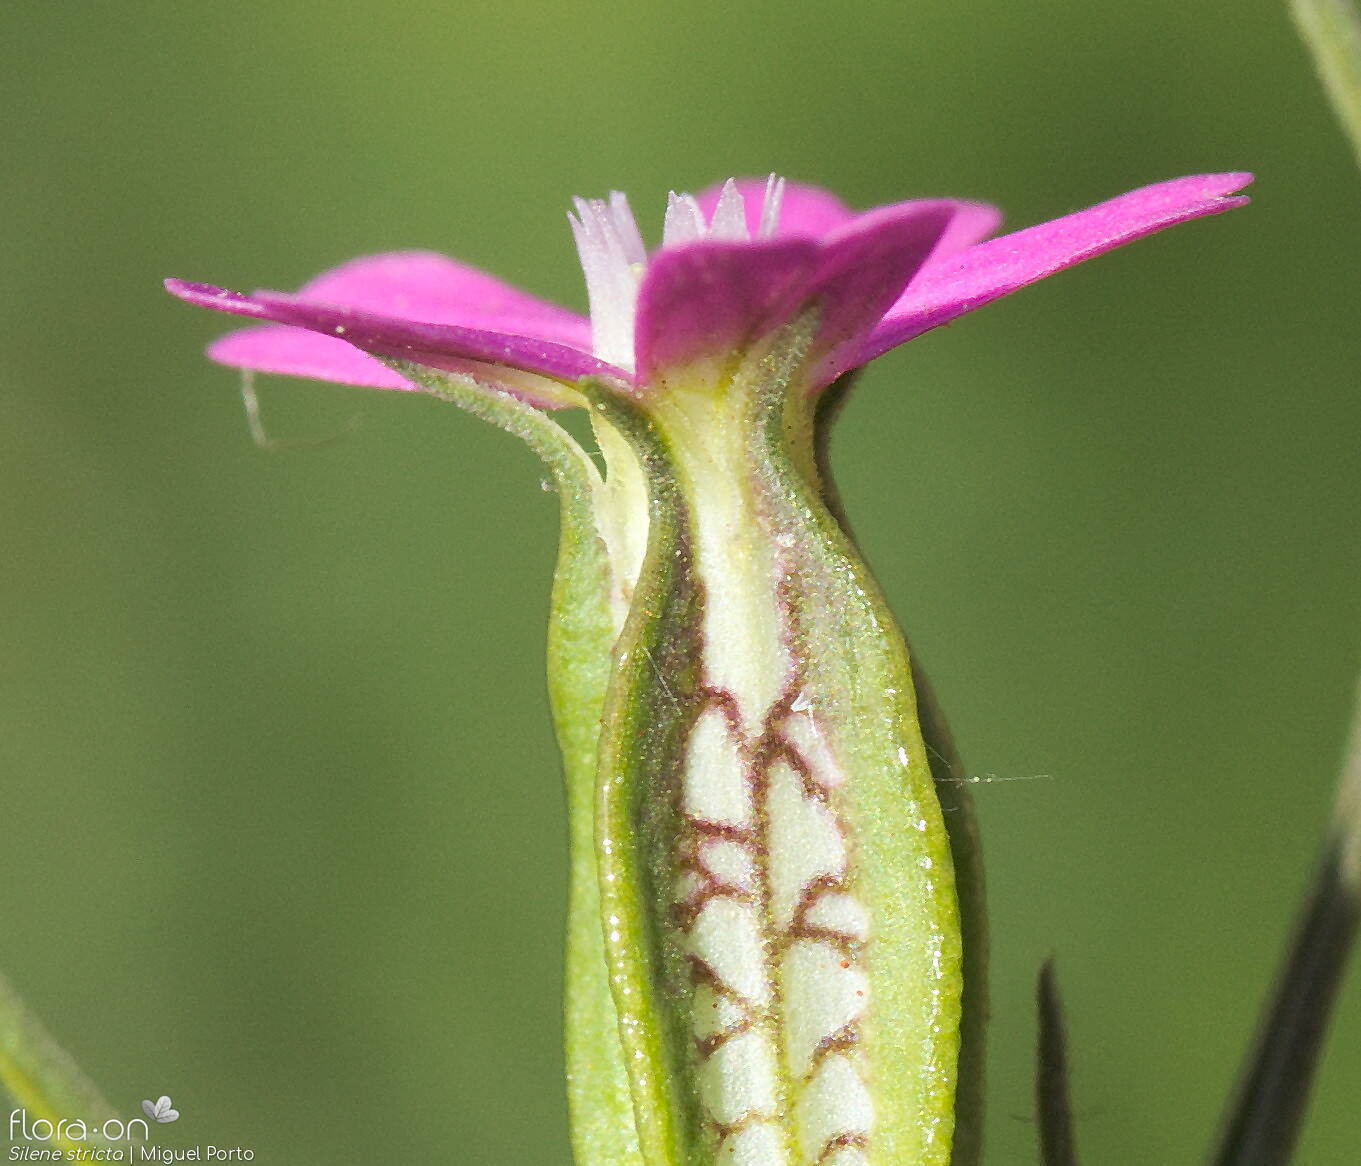 Silene stricta - Flor (close-up) | Miguel Porto; CC BY-NC 4.0